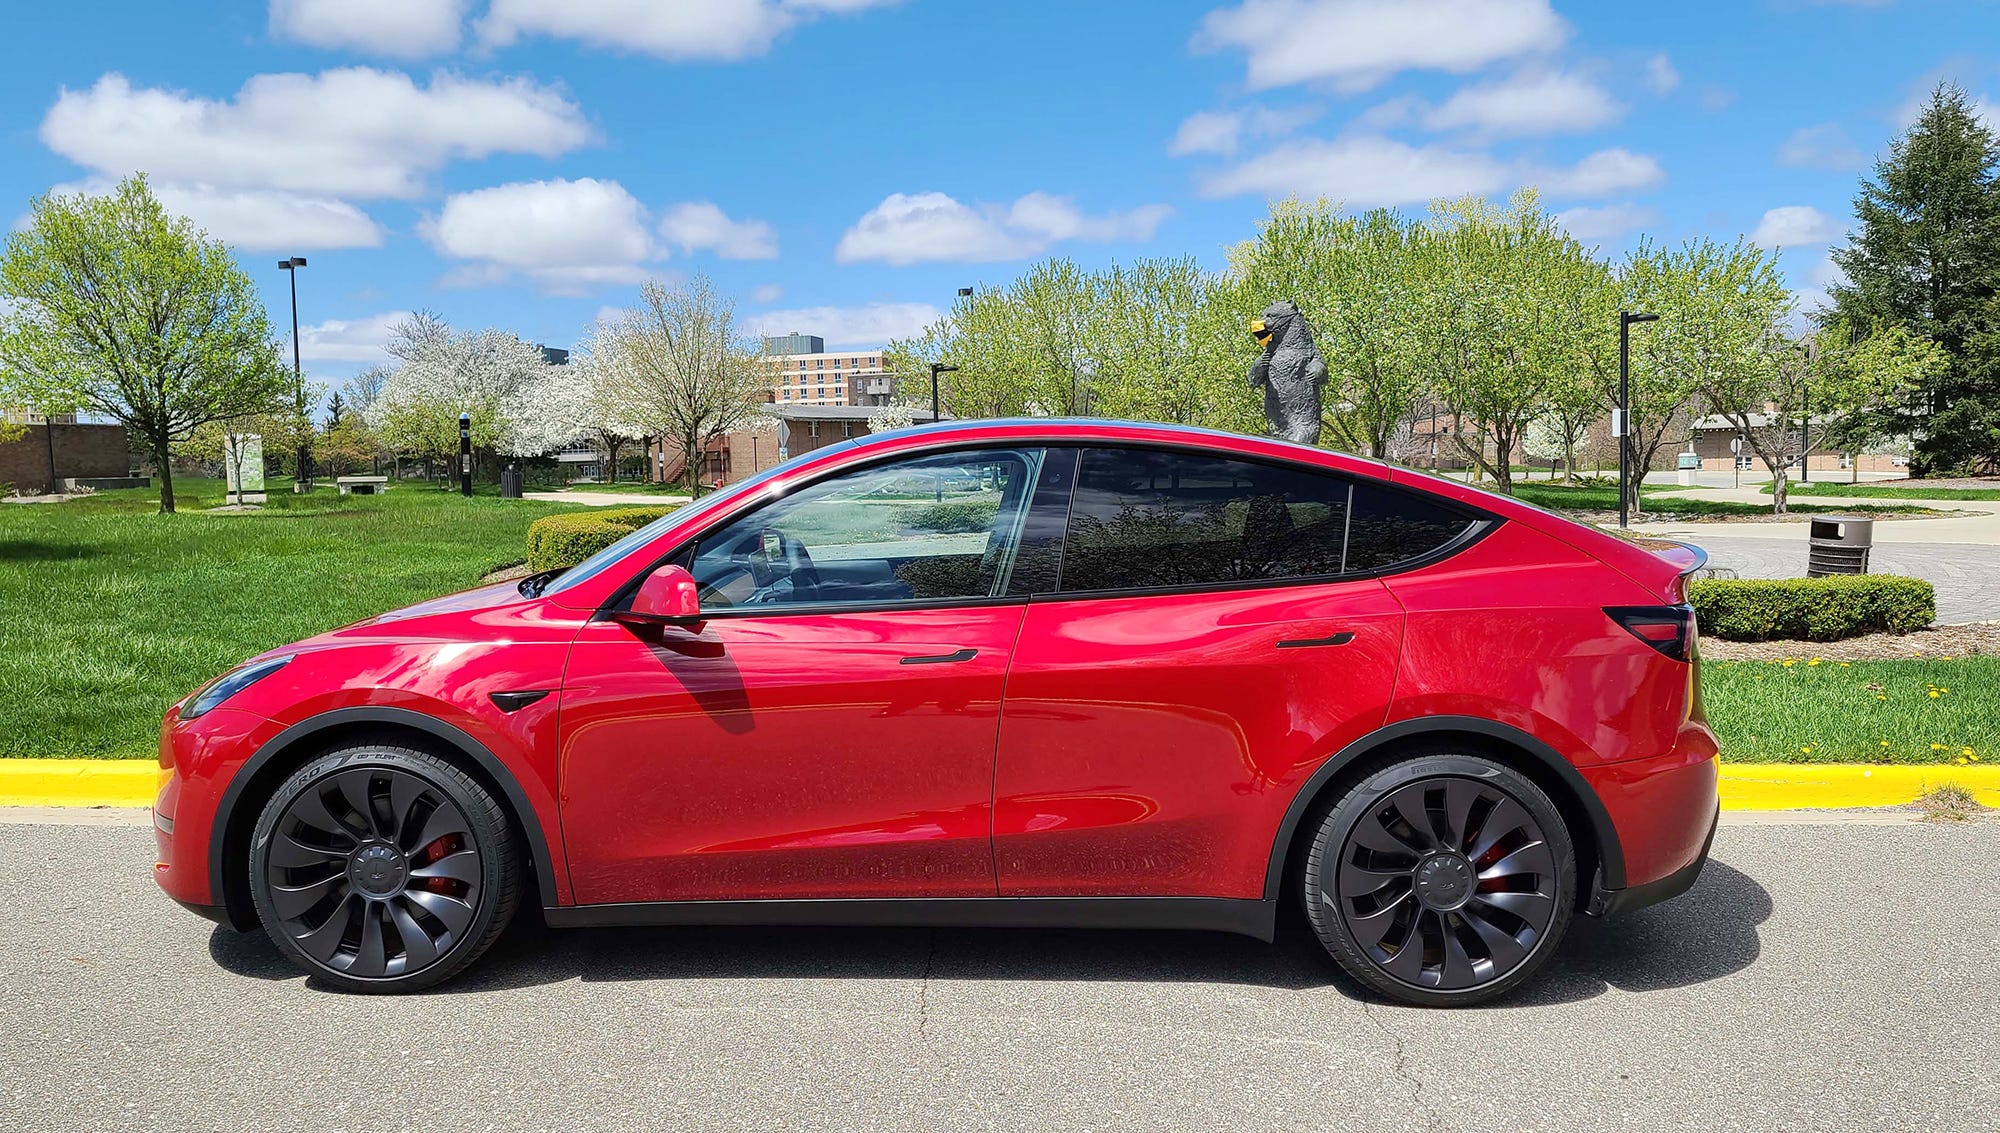 On the Oakland University campus, the Tesla Model Y social-distances from the Oakland bear mascot.